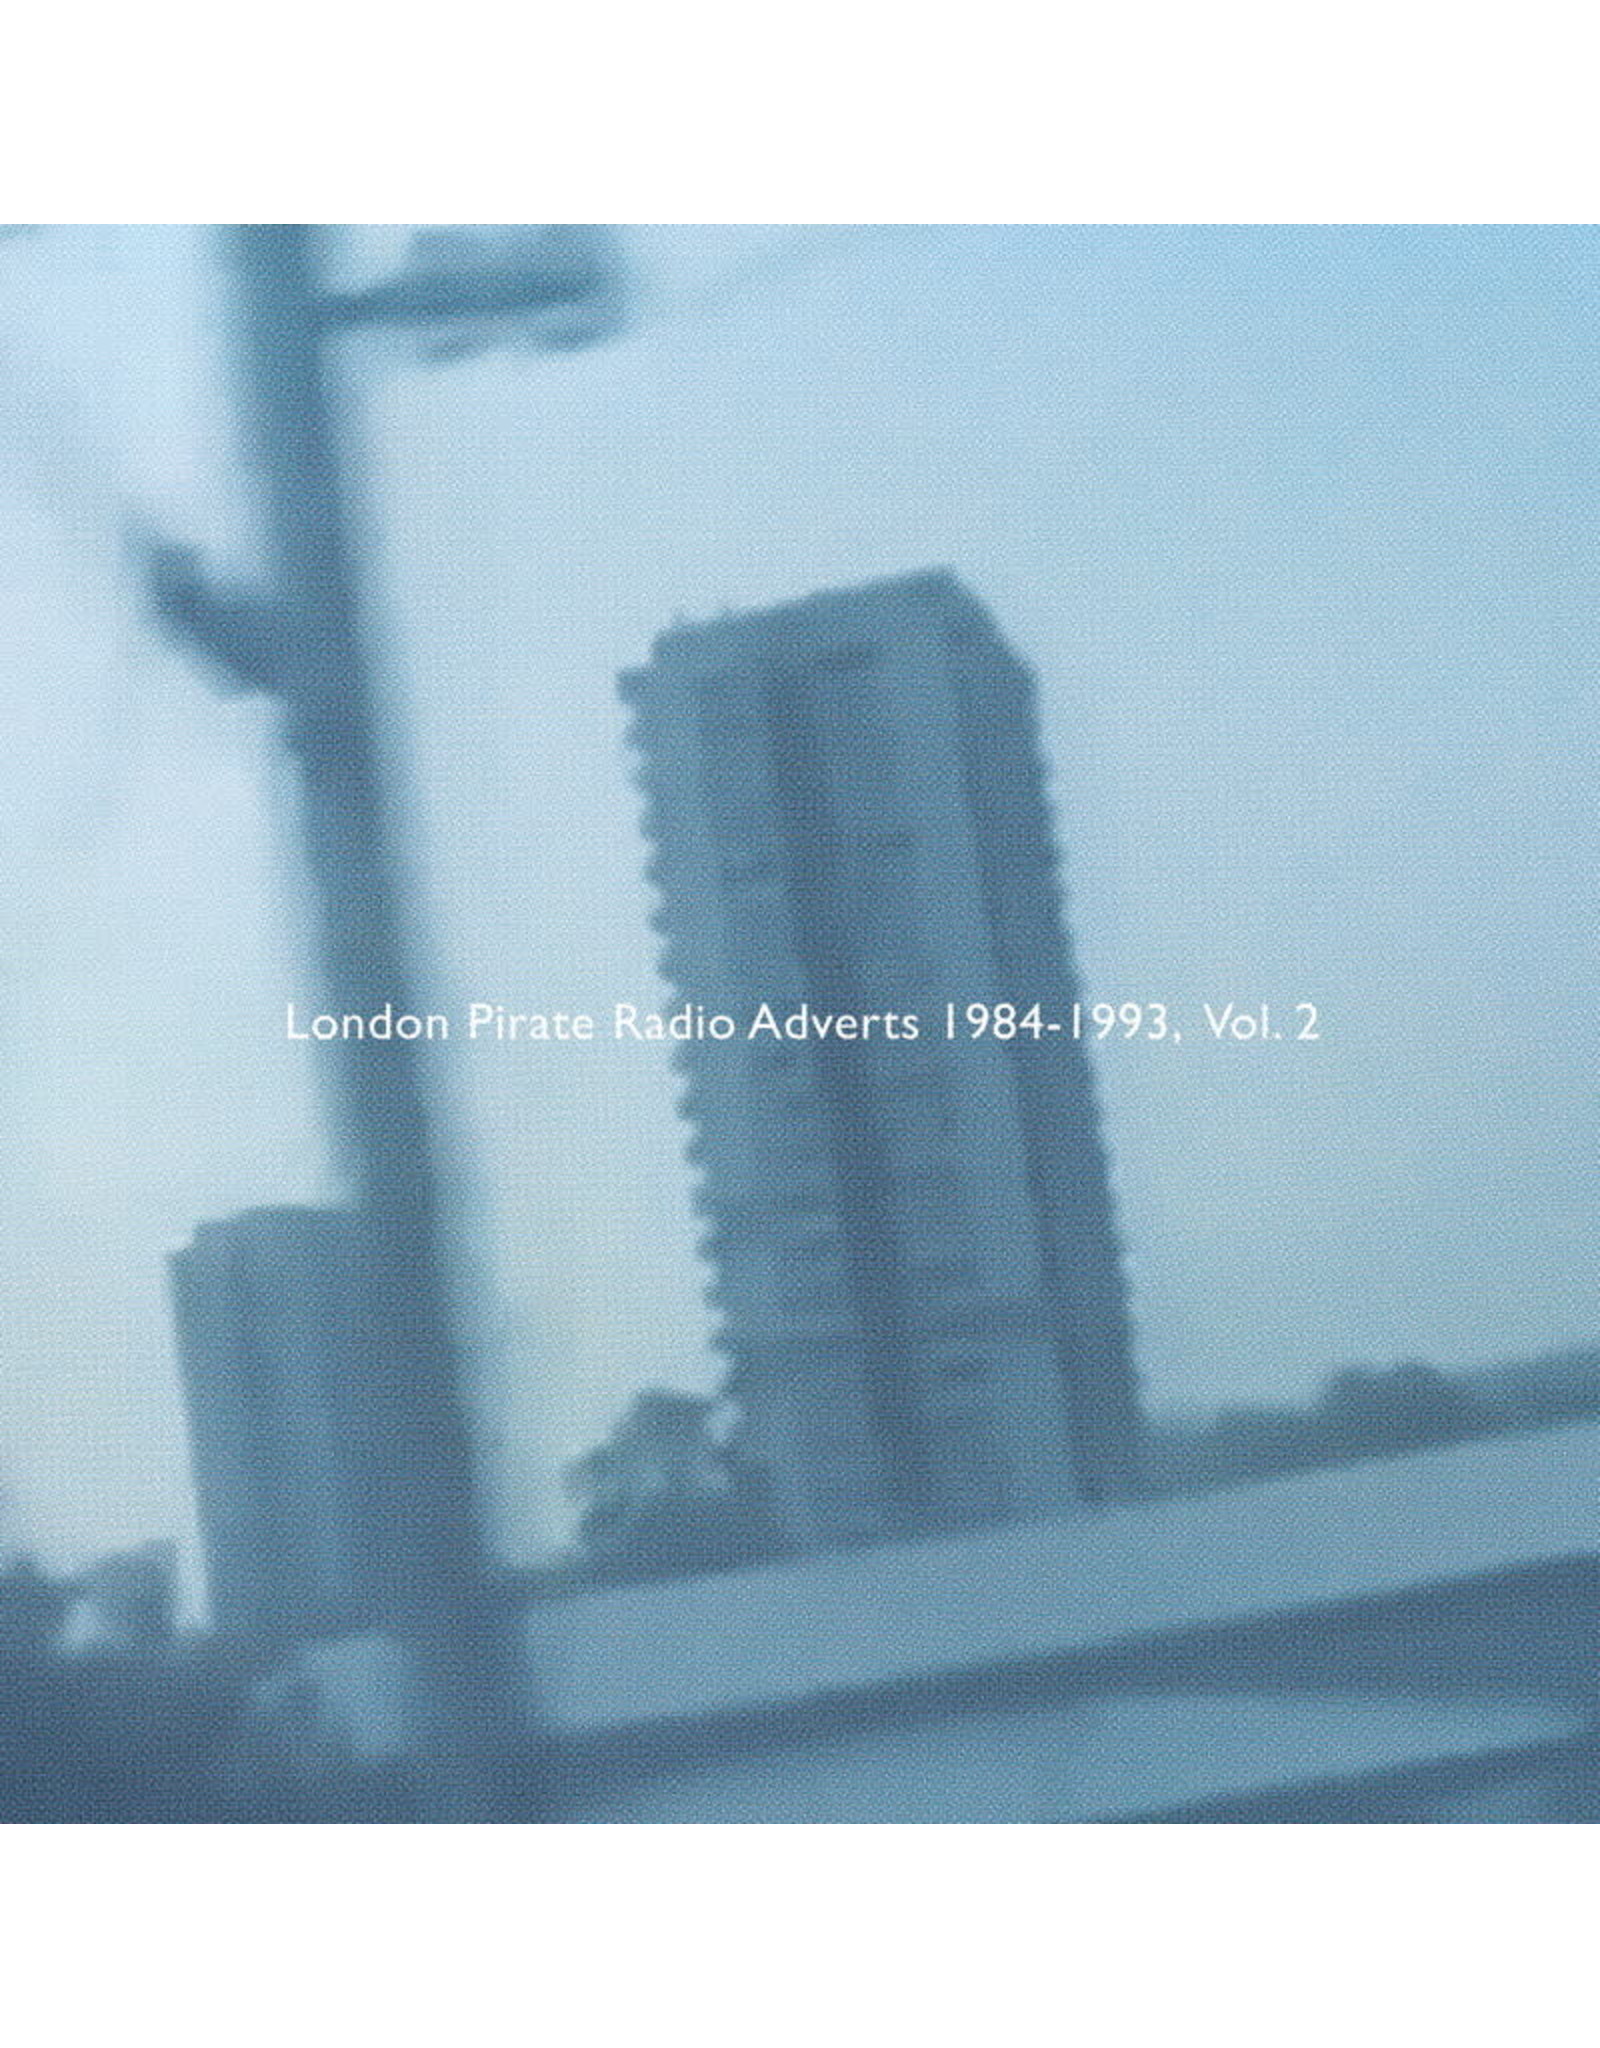 Death Is Not The End Death Is Not The End: London Pirate Radio Adverts 1984-1993, Vol. 2 LP